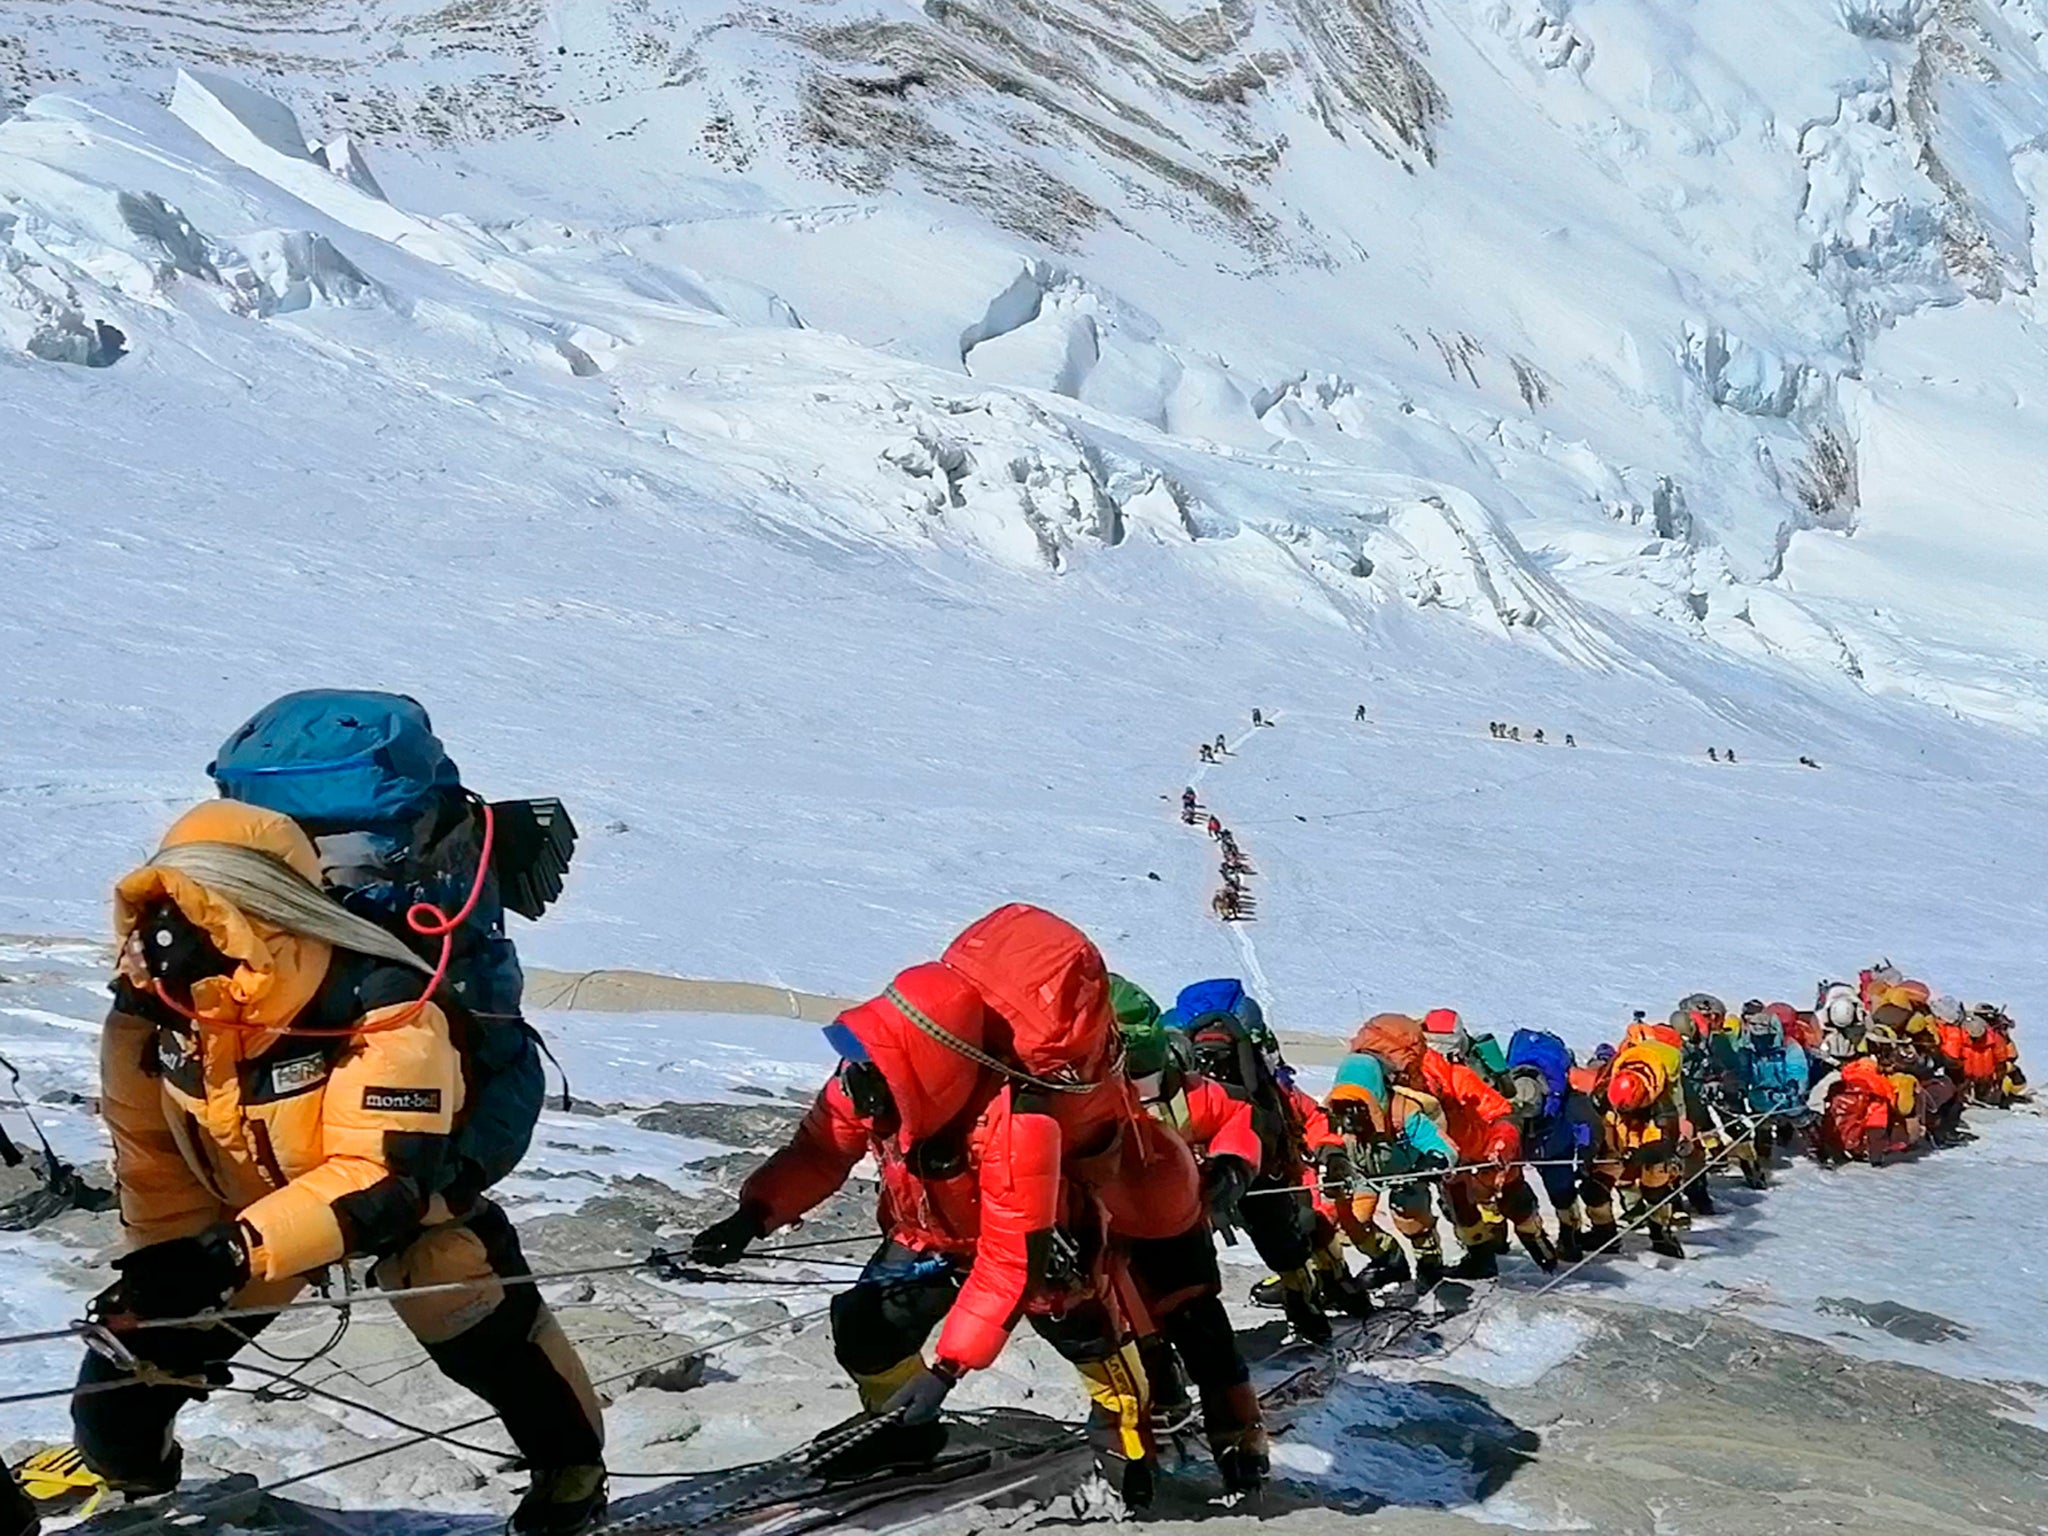 Climbing Everest could be the ultimate new year resolution